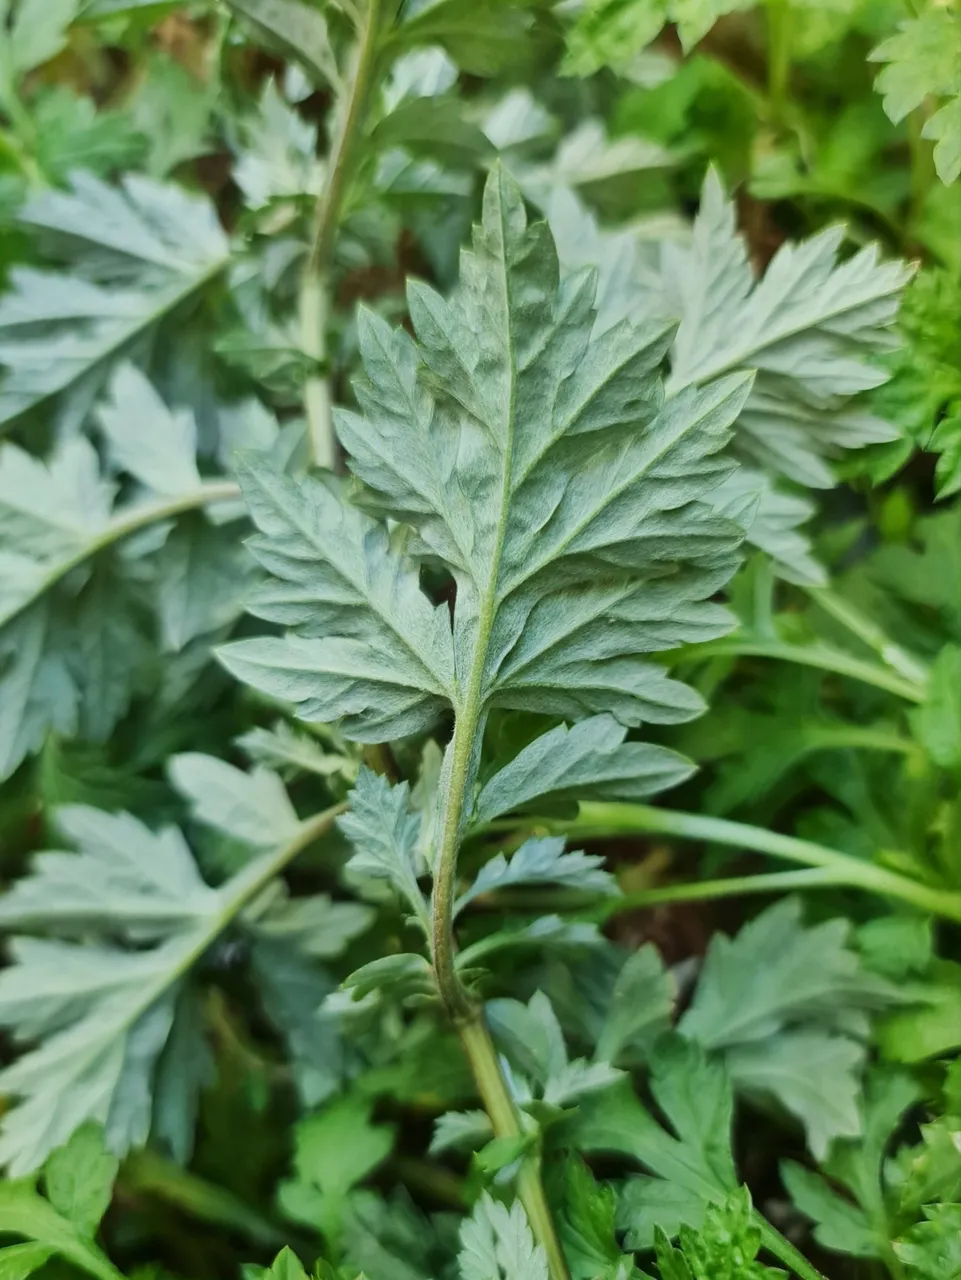 Mugwort leaves are silvery on the underside.